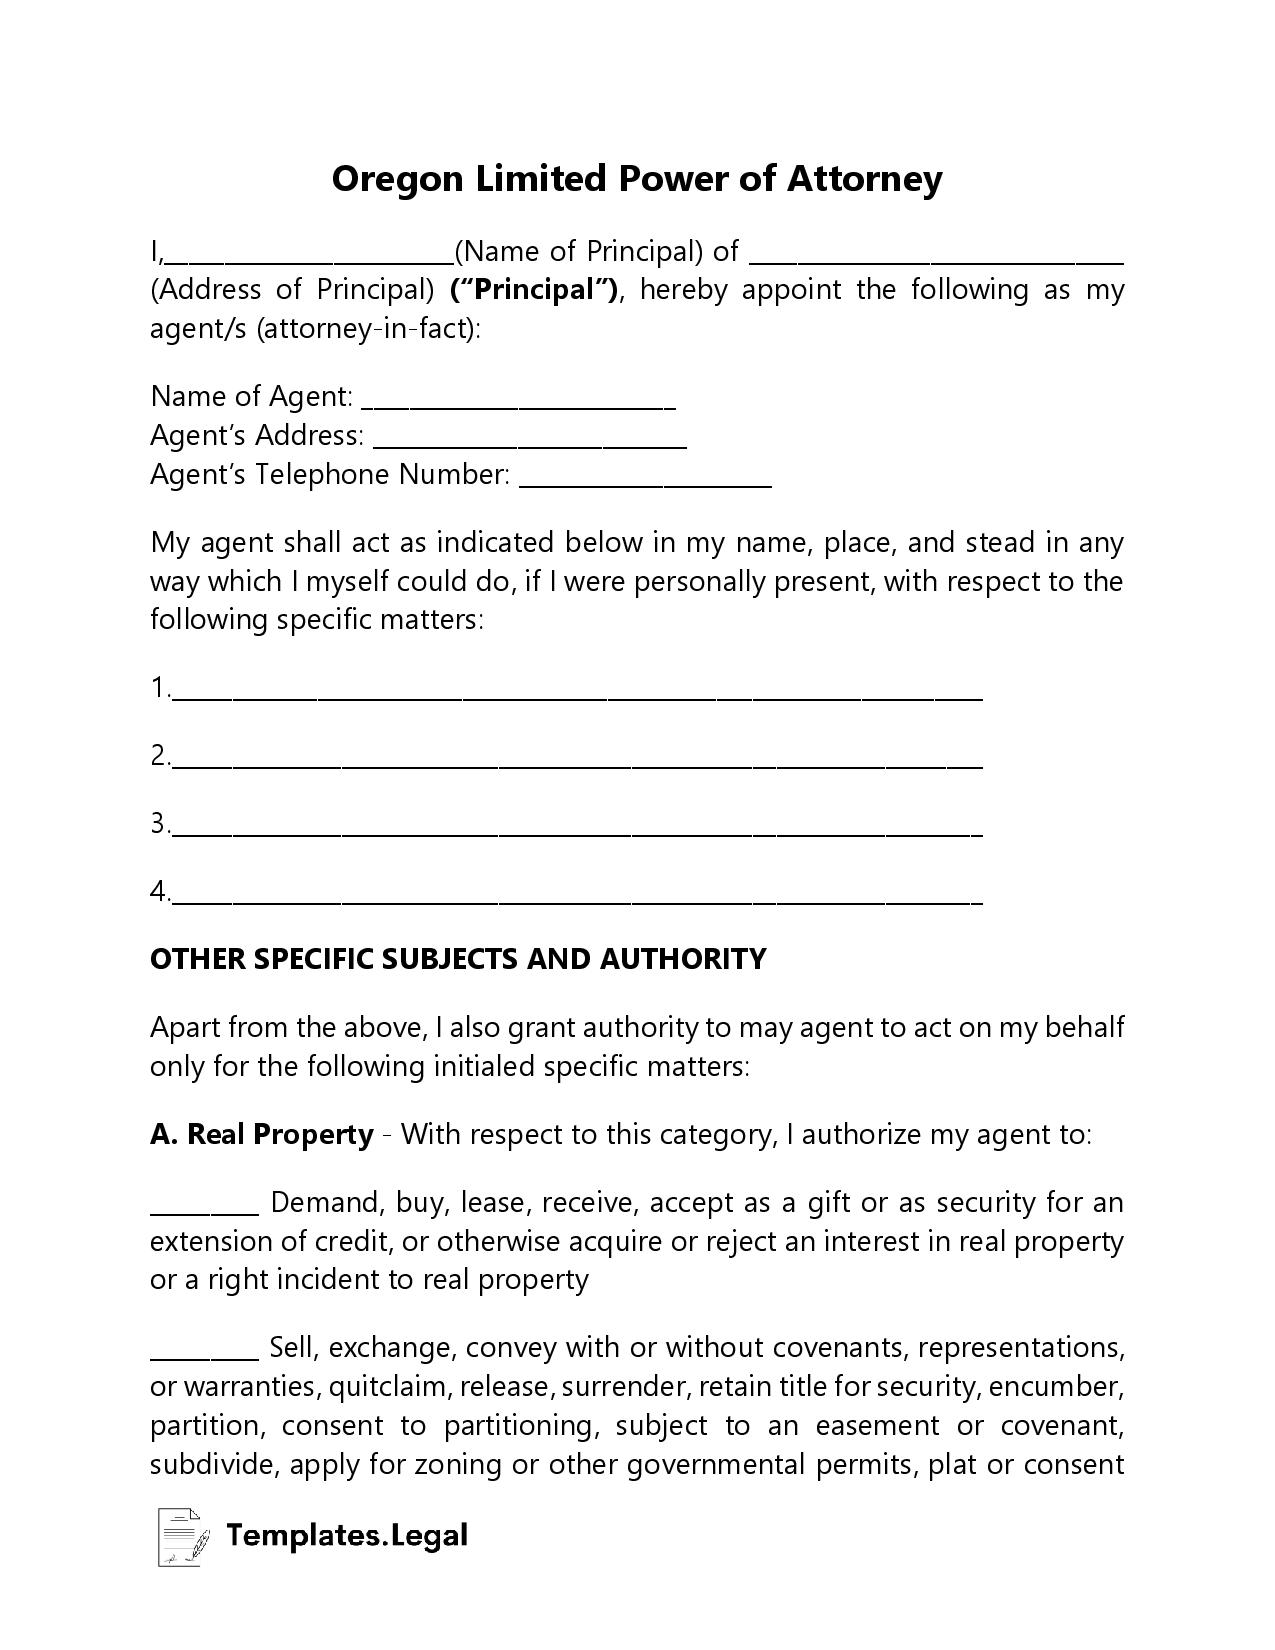 Oregon Limited Power of Attorney - Templates.Legal